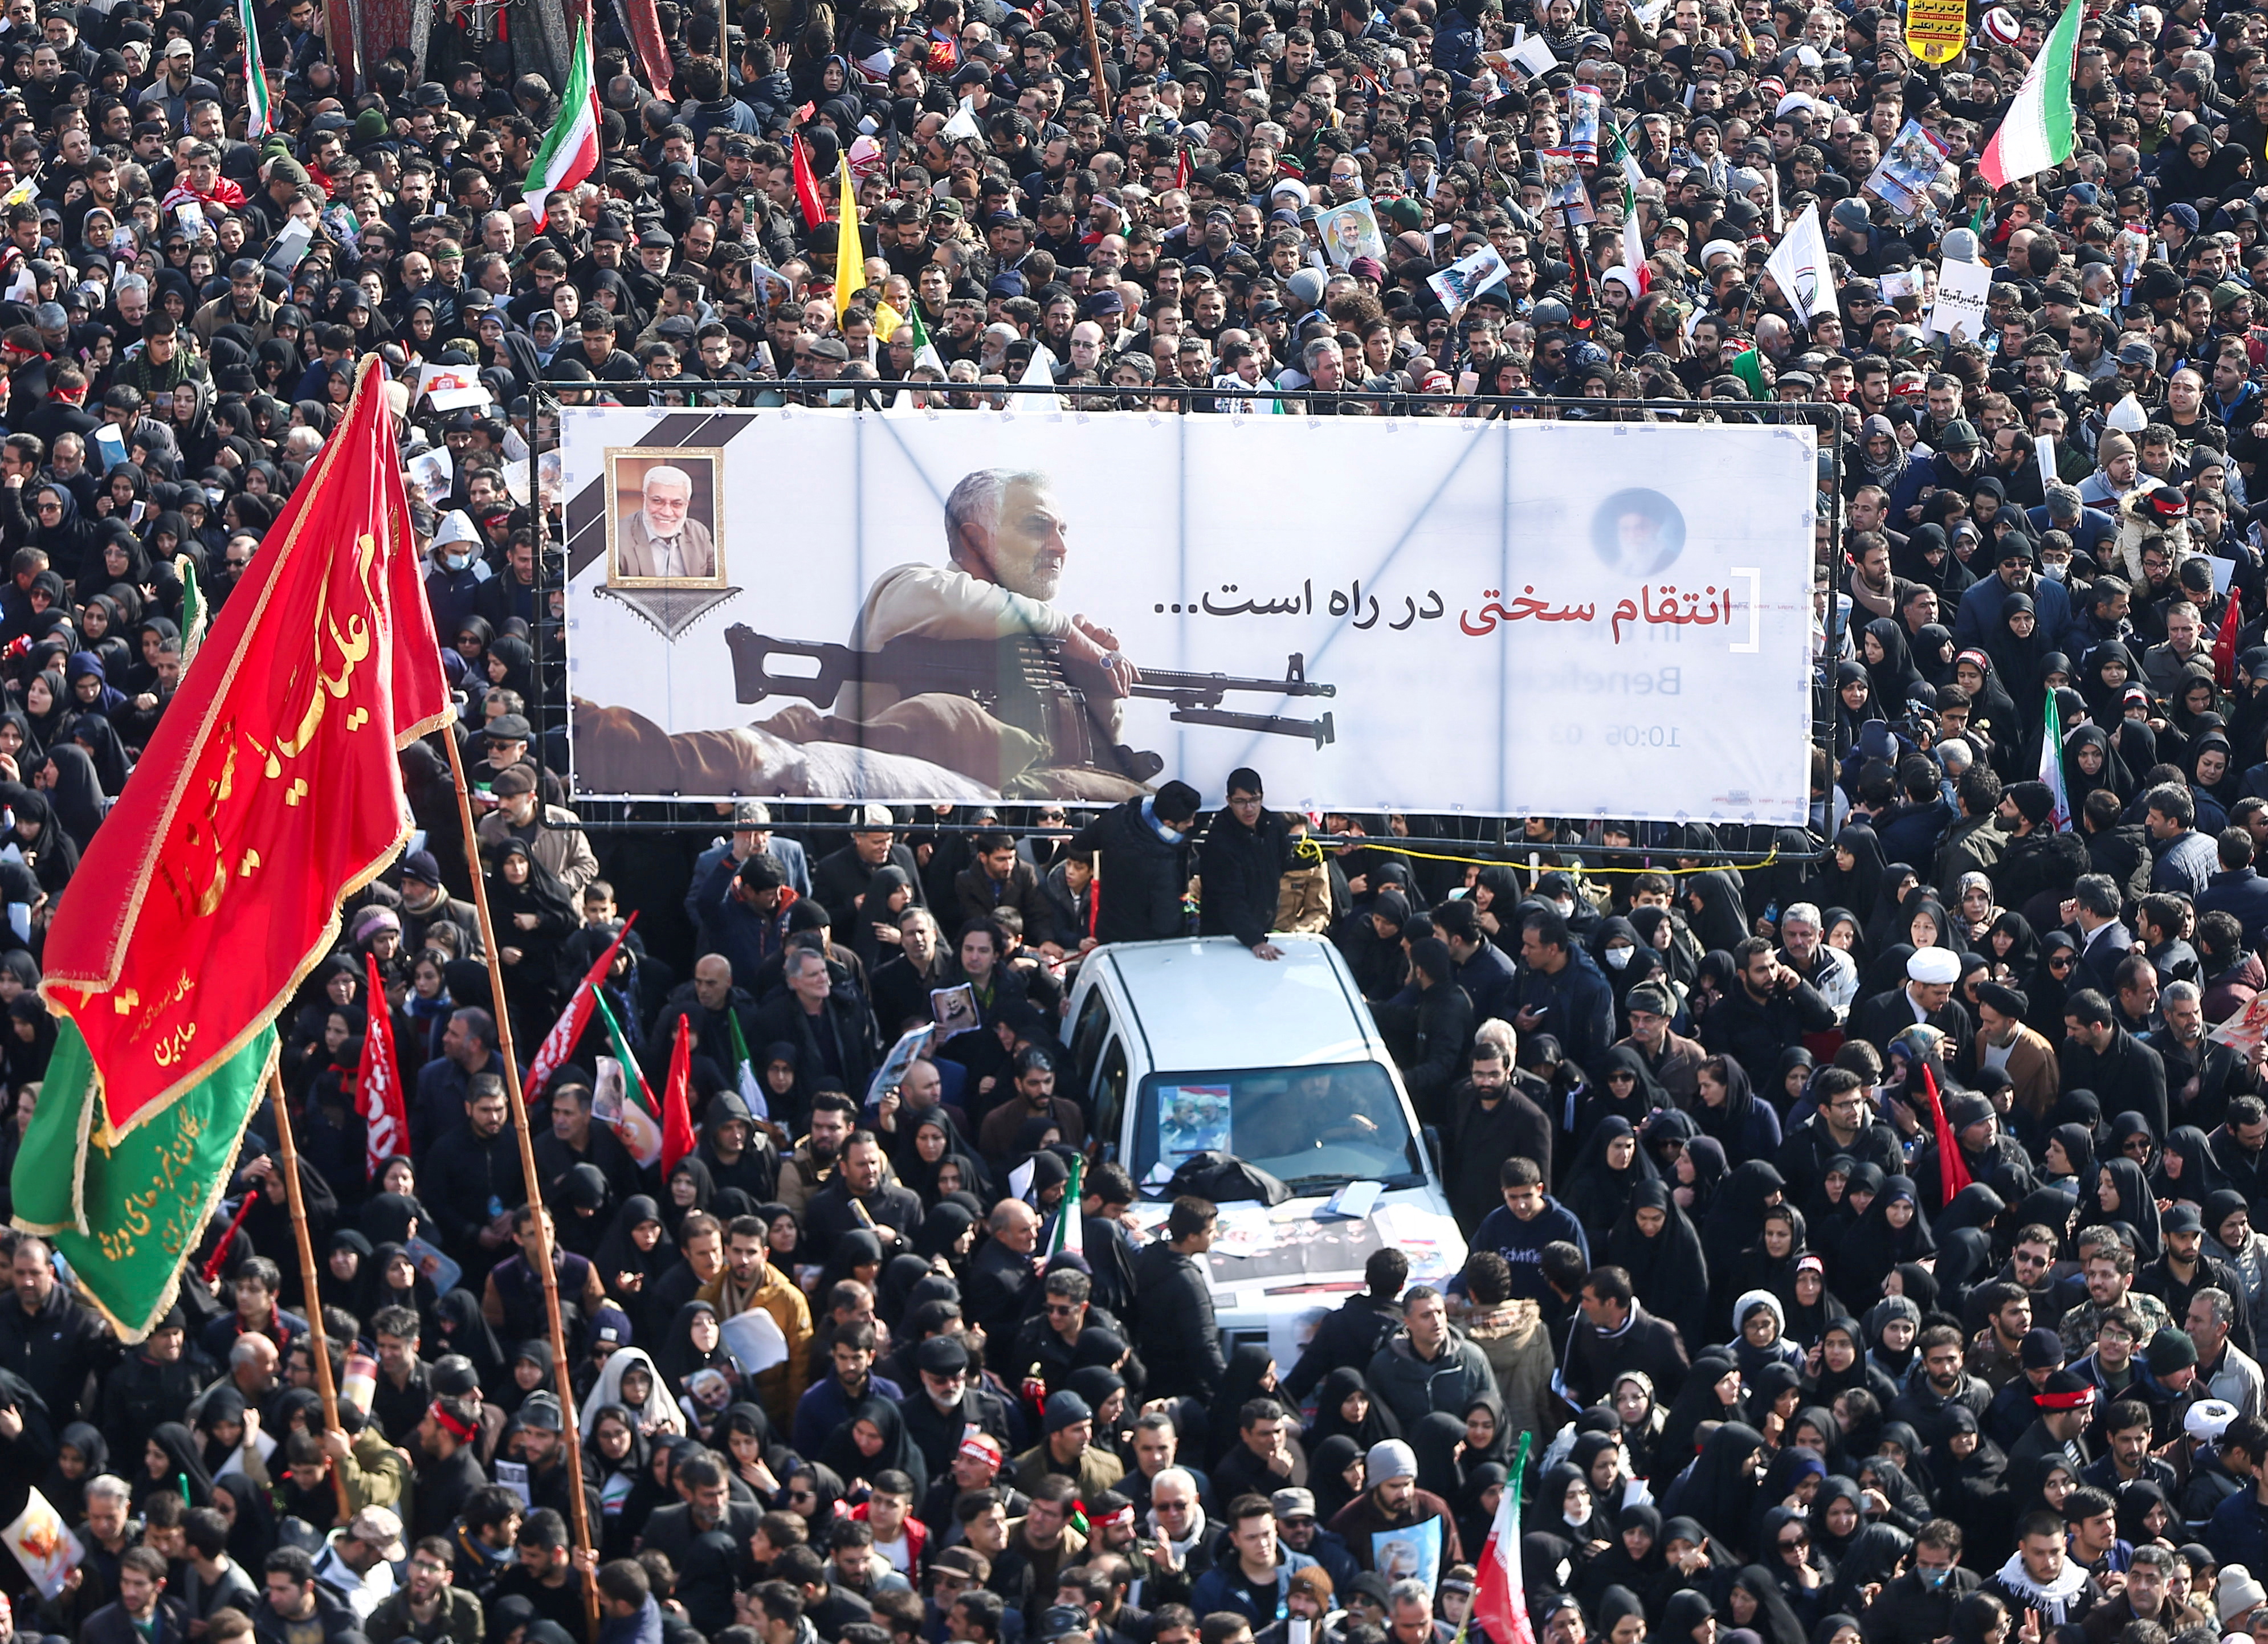 Iranian people attend a funeral procession for Iranian Major-General Qassem Soleimani, head of the elite Quds Force, and Iraqi militia commander Abu Mahdi al-Muhandis, who were killed in an air strike at Baghdad airport, in Tehran, Iran January